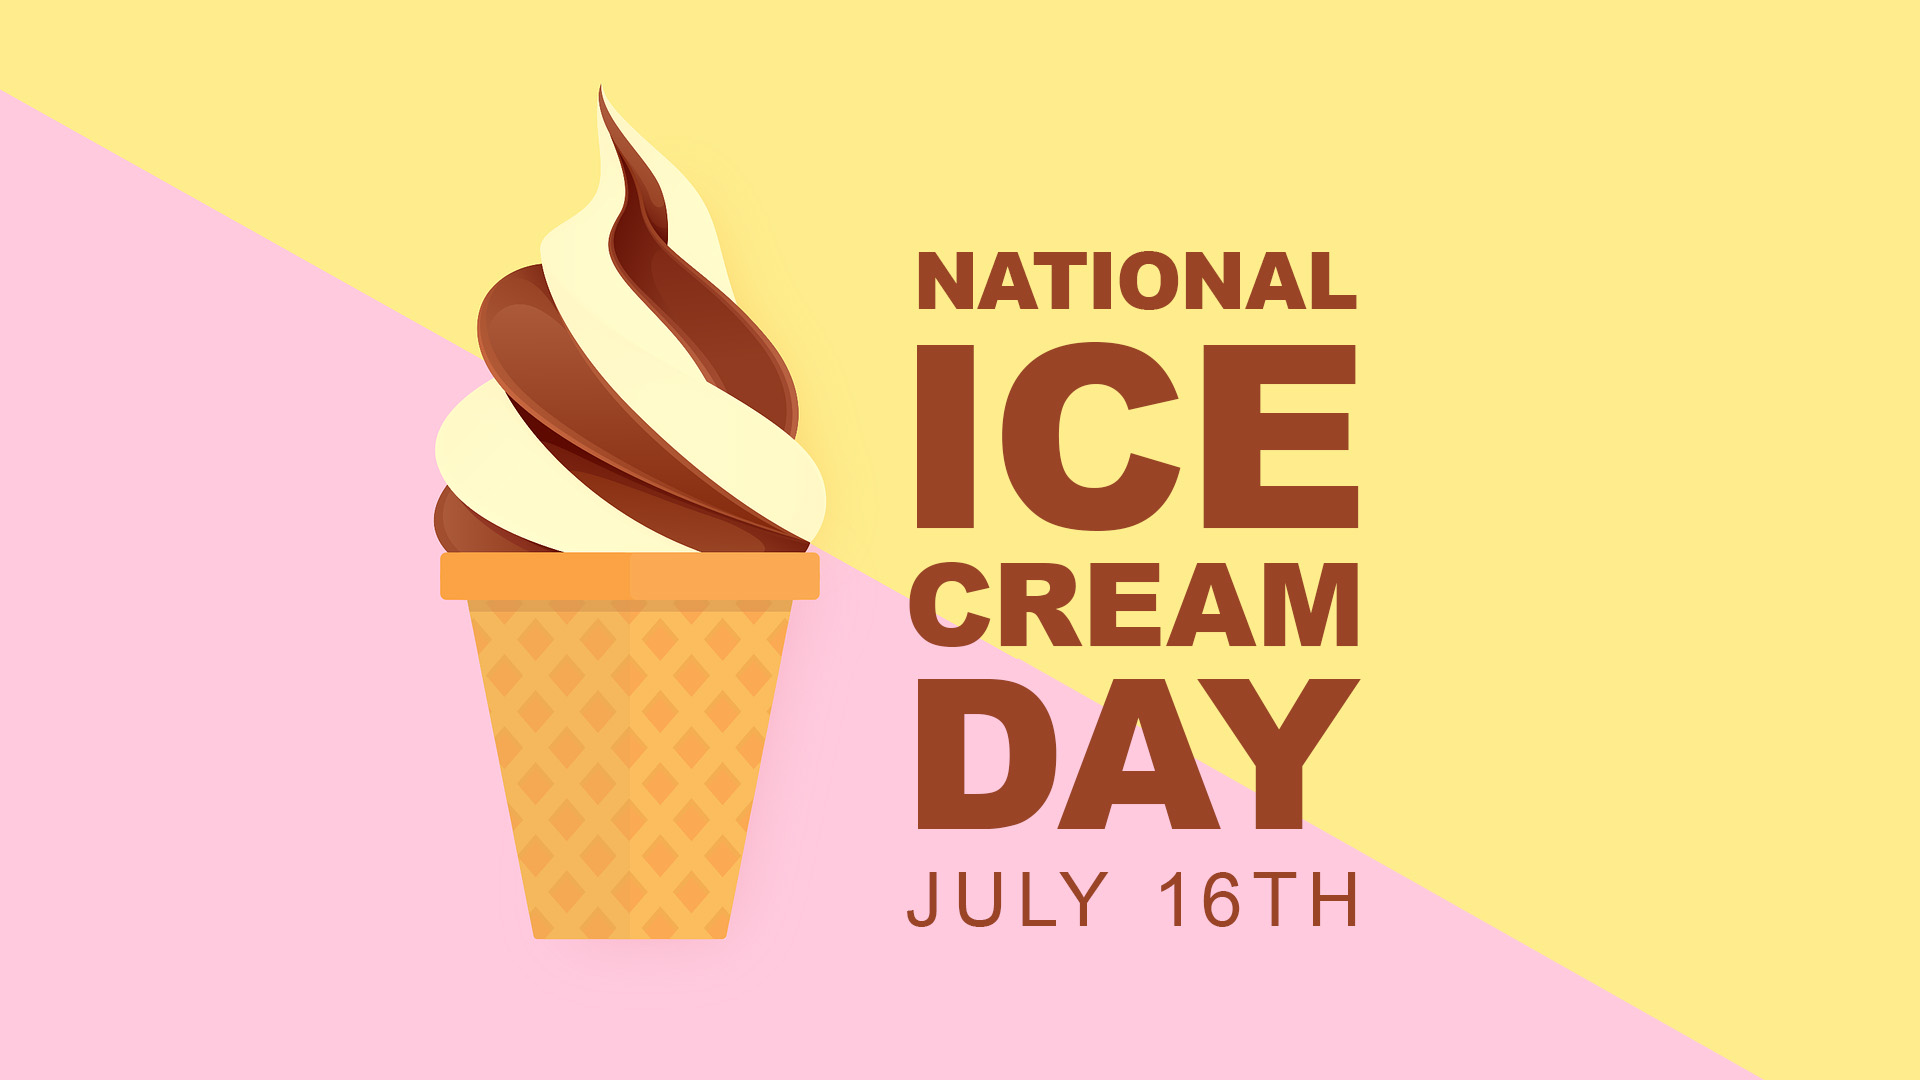 Illustrated image of twist ice cream in a wafer cone. National Ice Cream Day July 16th is stacked on top one another and is the the right of the cone. The background is made up of a angled pink and yellow dividing line.